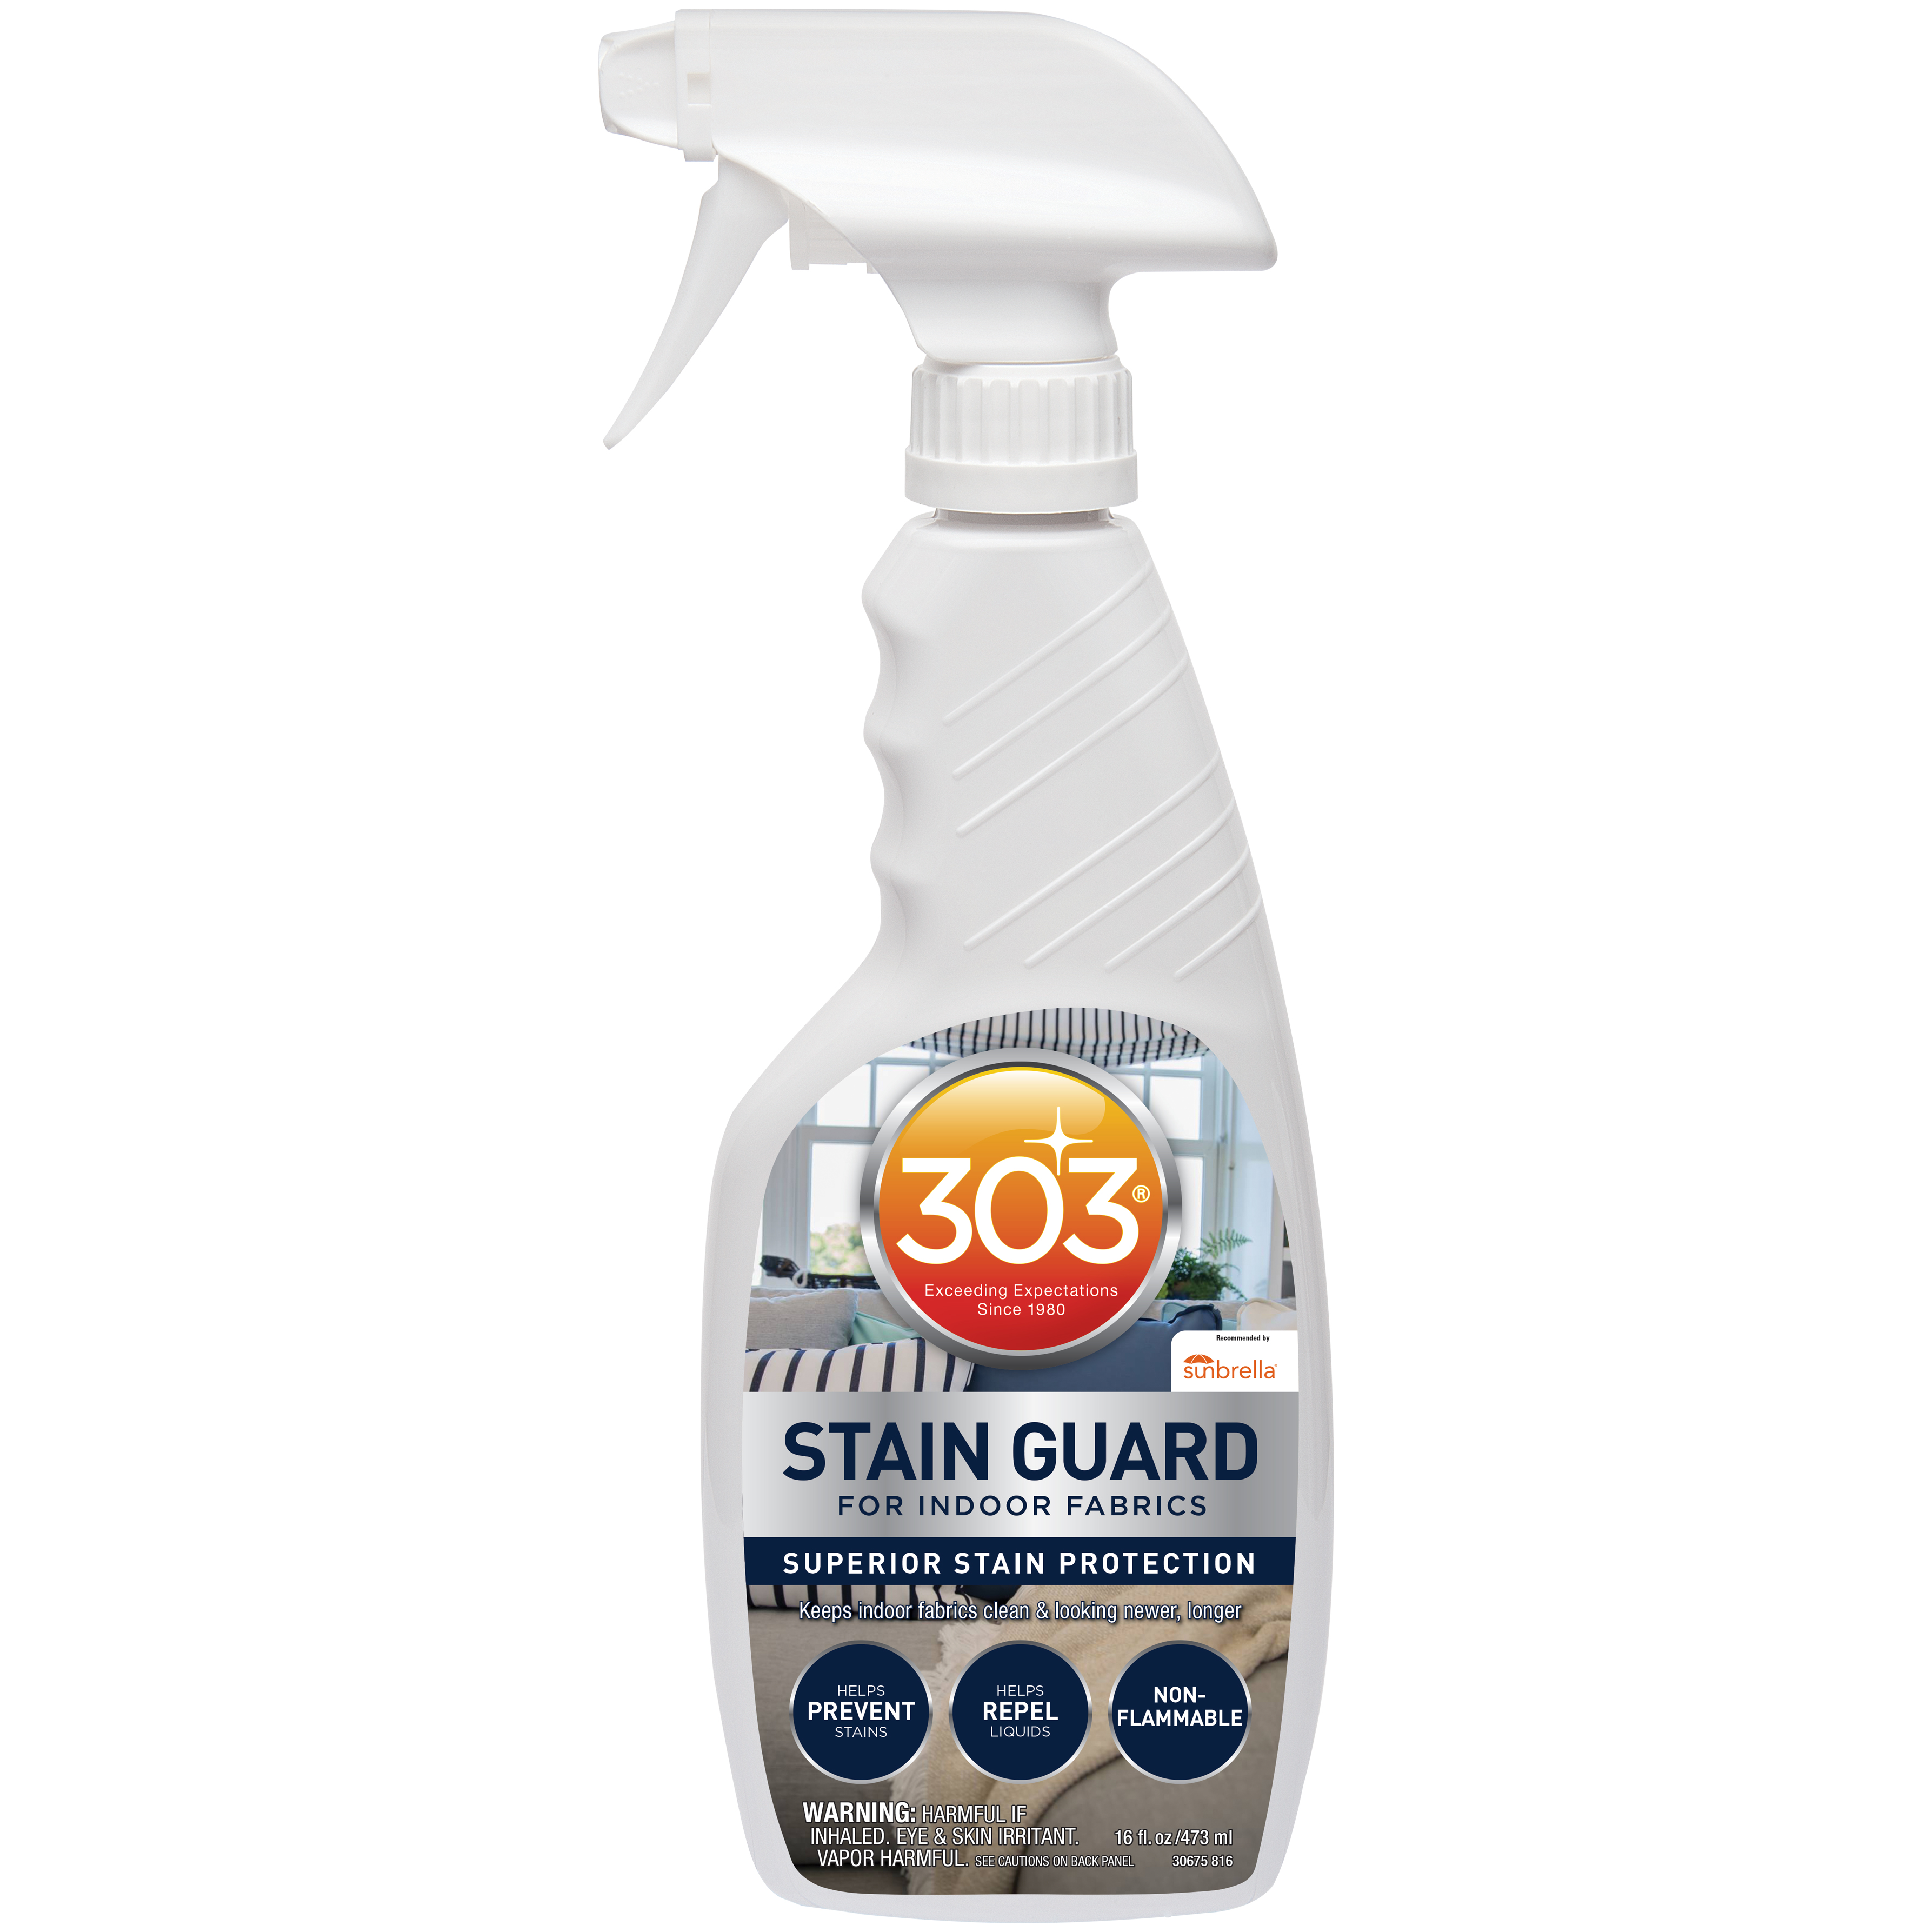 303 Stain Guard for Interior Fabrics Image